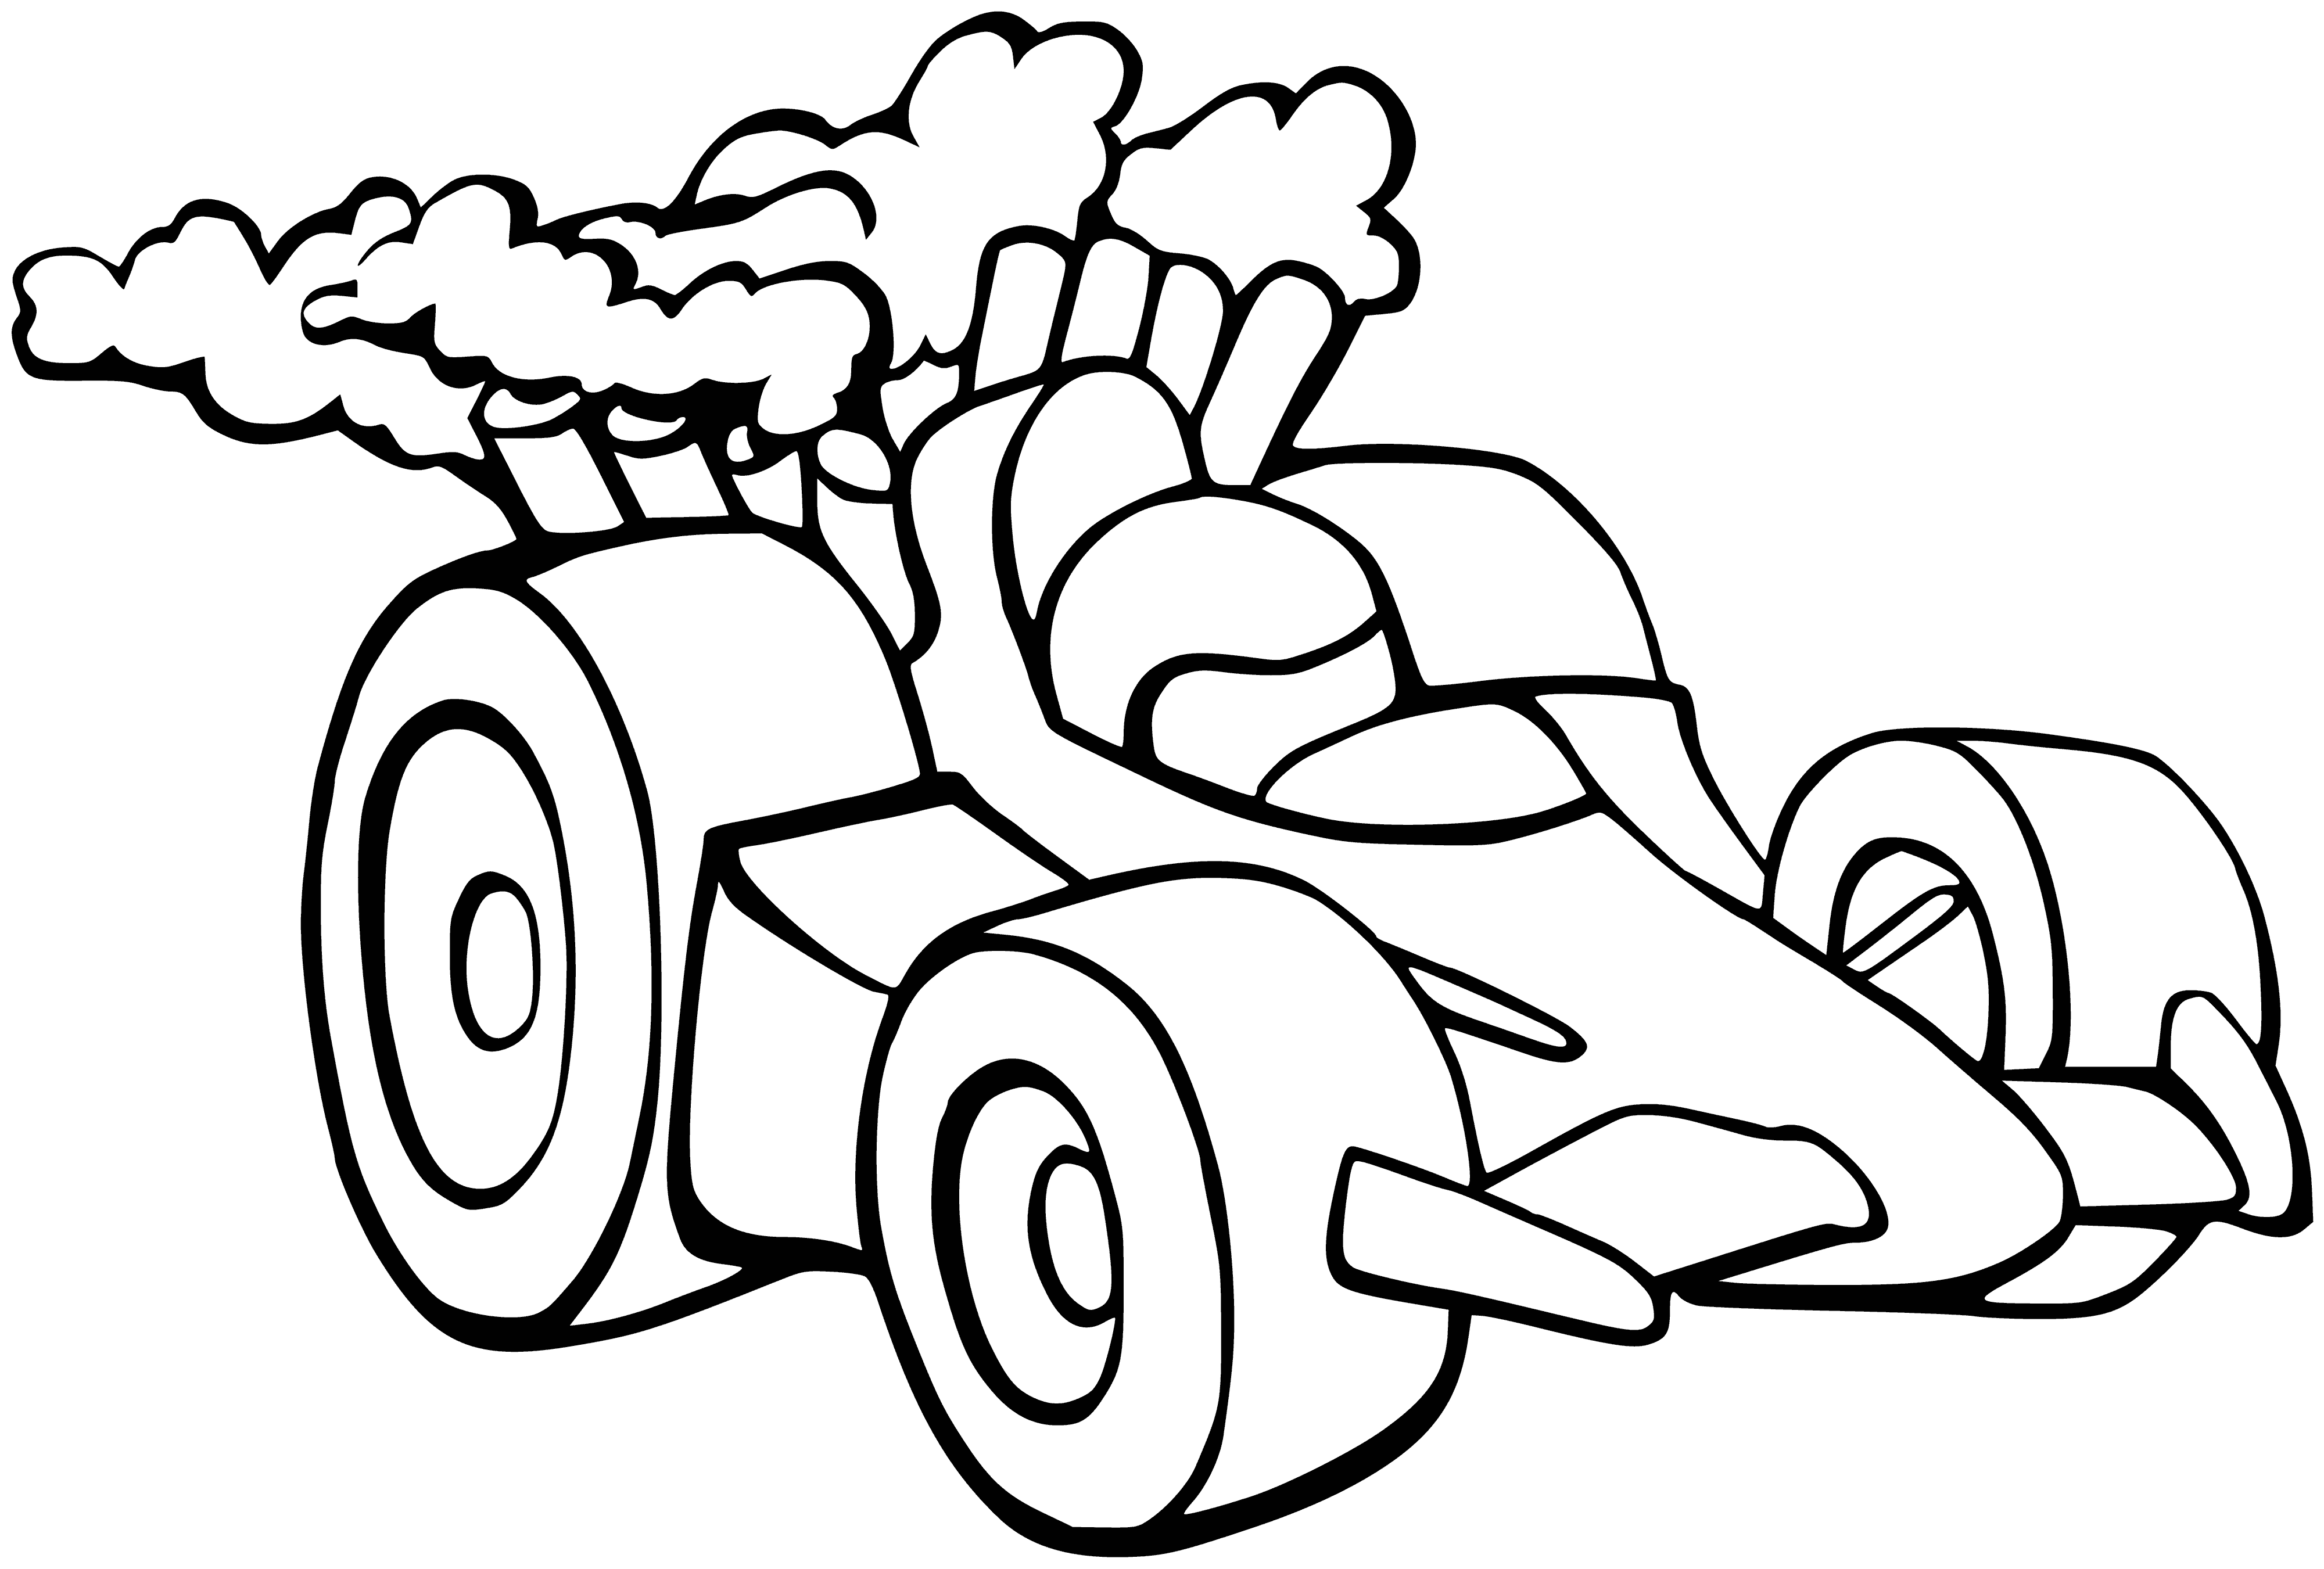 coloring page: A low-riding racing car zooms past with a large spoiler & decals, showing the sponsors. #Sponsorship